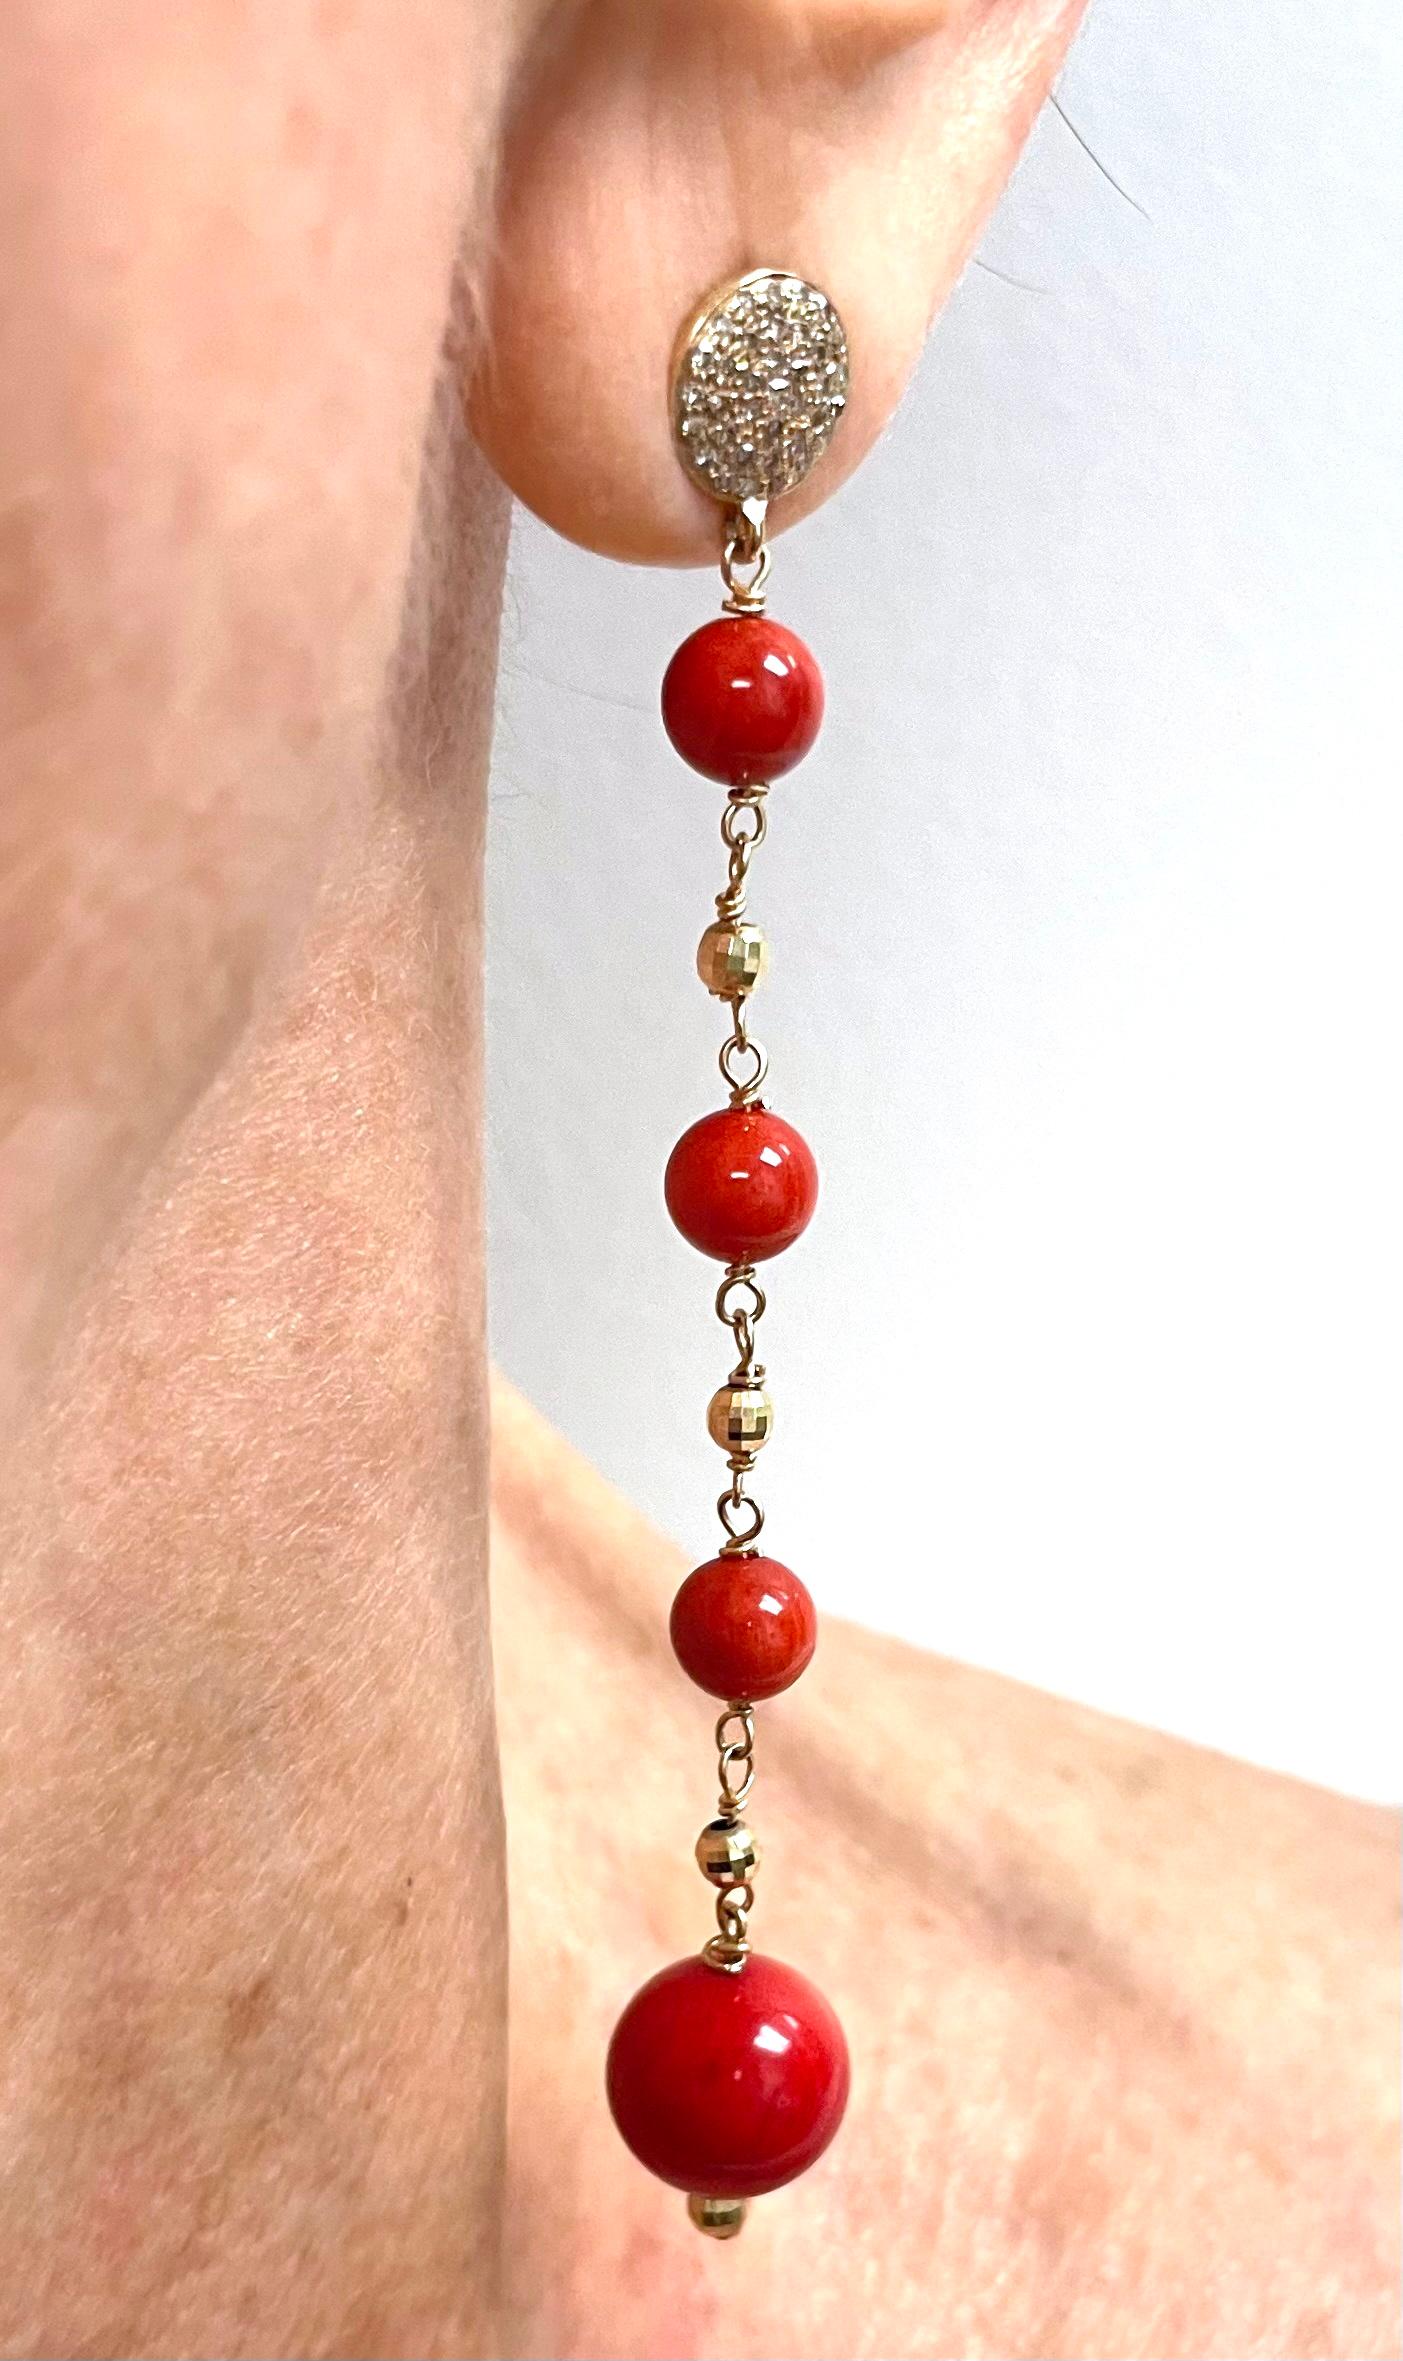 Description
Beautiful, vibrant Coral individually wire wrapped suspended from pave diamond ear posts and accented with small yellow gold faceted balls to create a harmonious feminine style. 
Item # E3361
Check out matching necklace Item # N3781 and